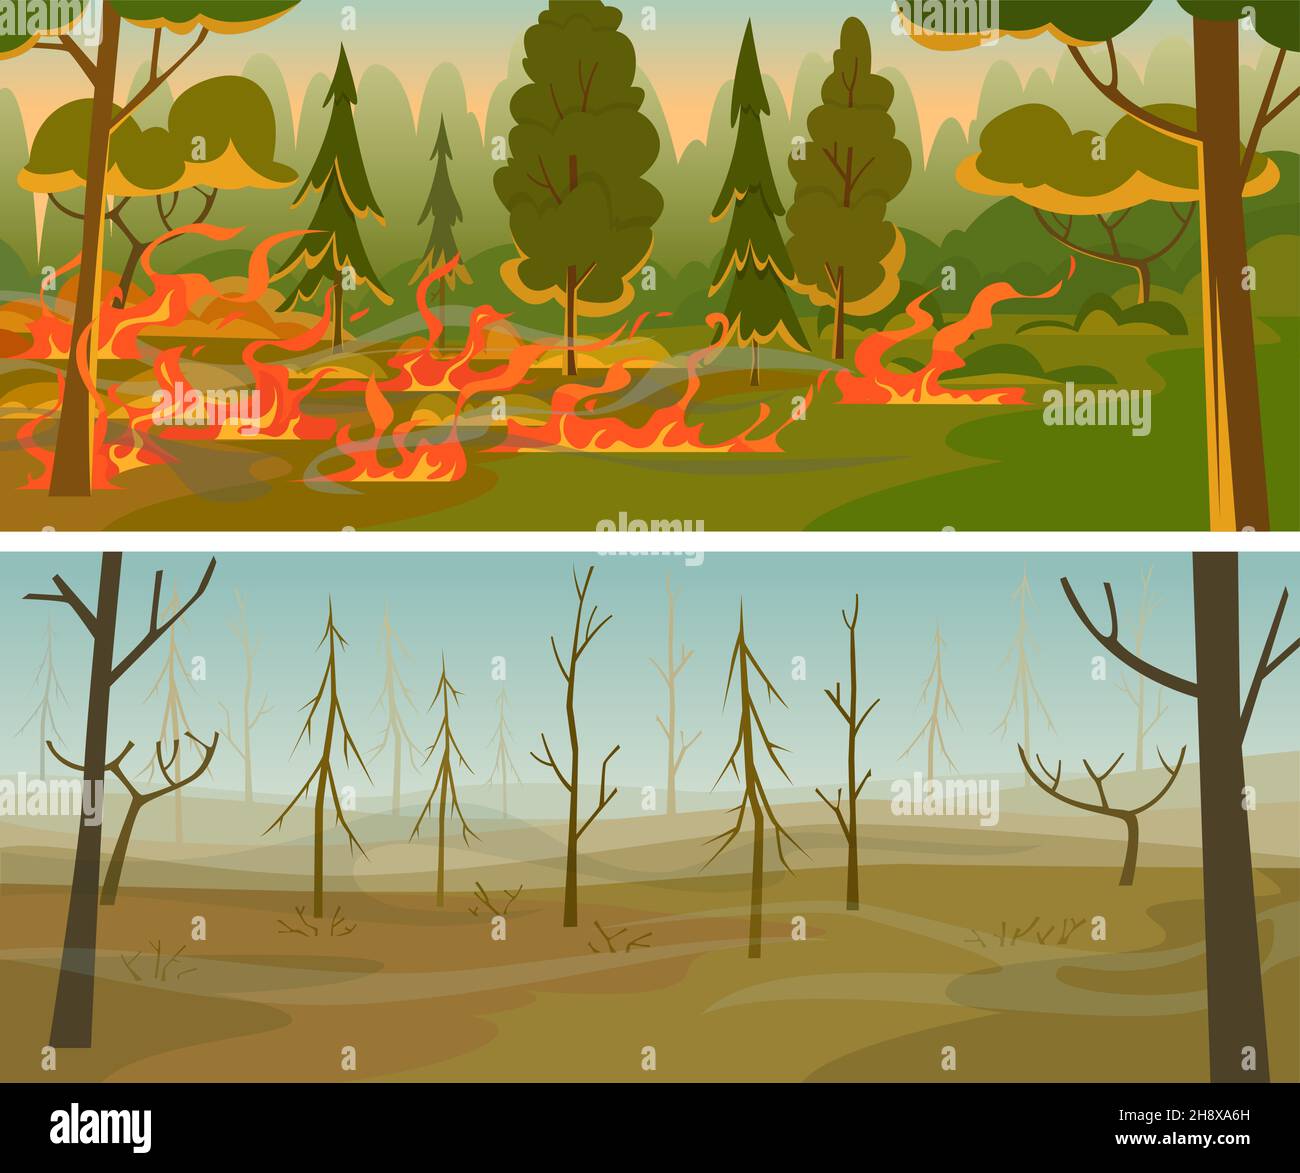 Fire damaged trees Stock Vector Images - Alamy